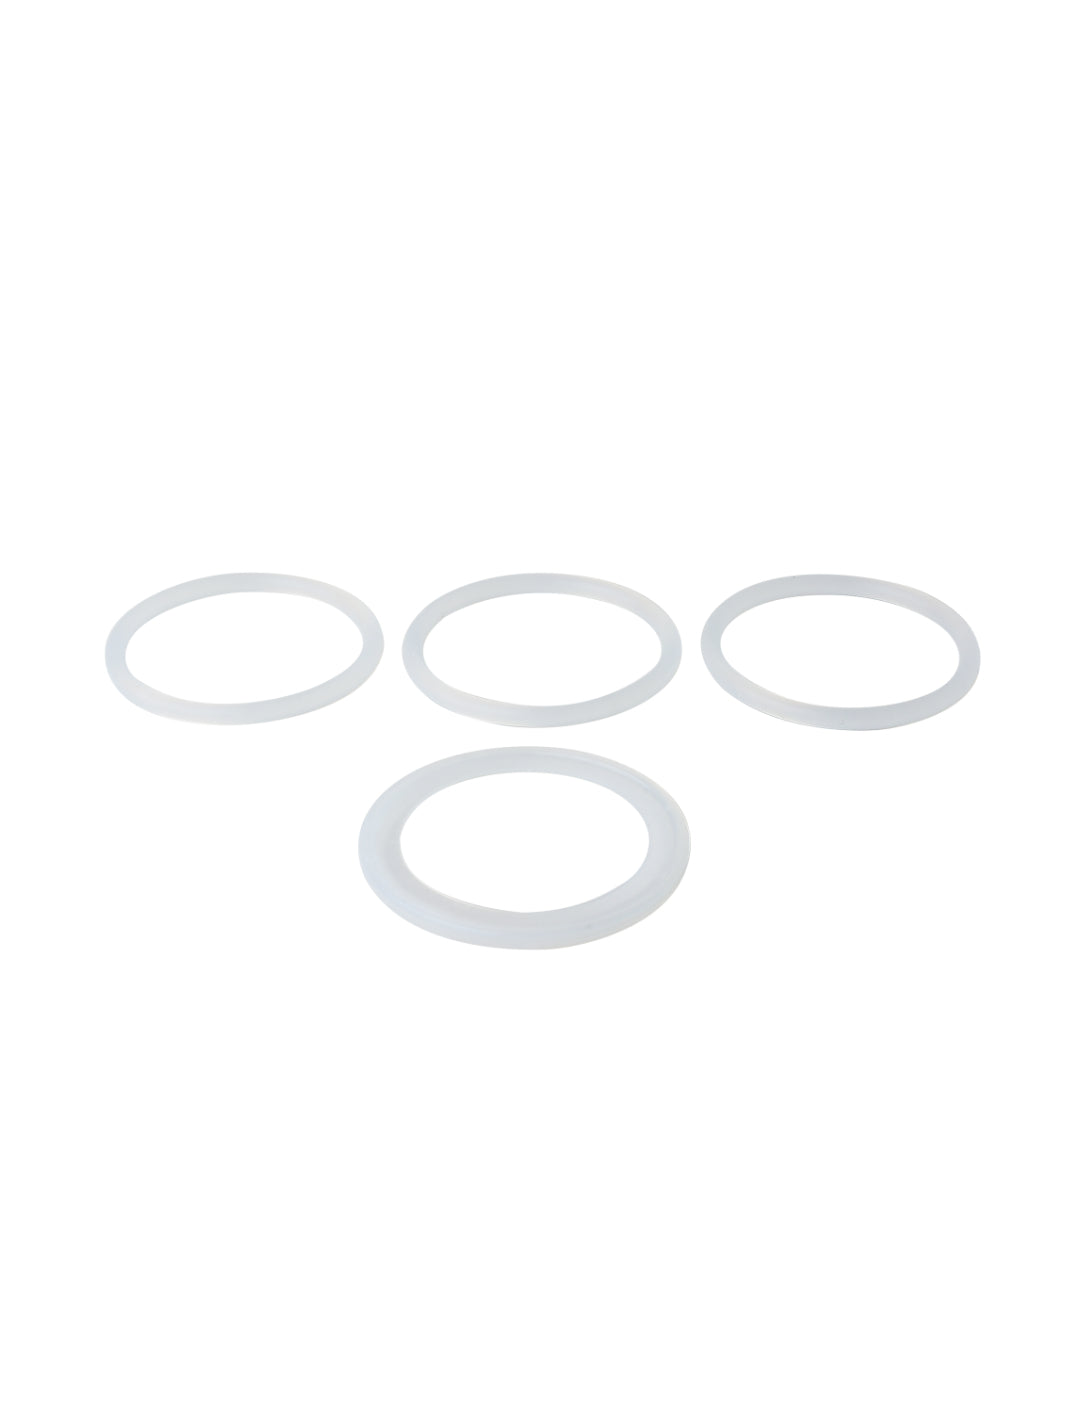 HUGH Leverpresso Replacement O-Rings and Shower Screen Seal